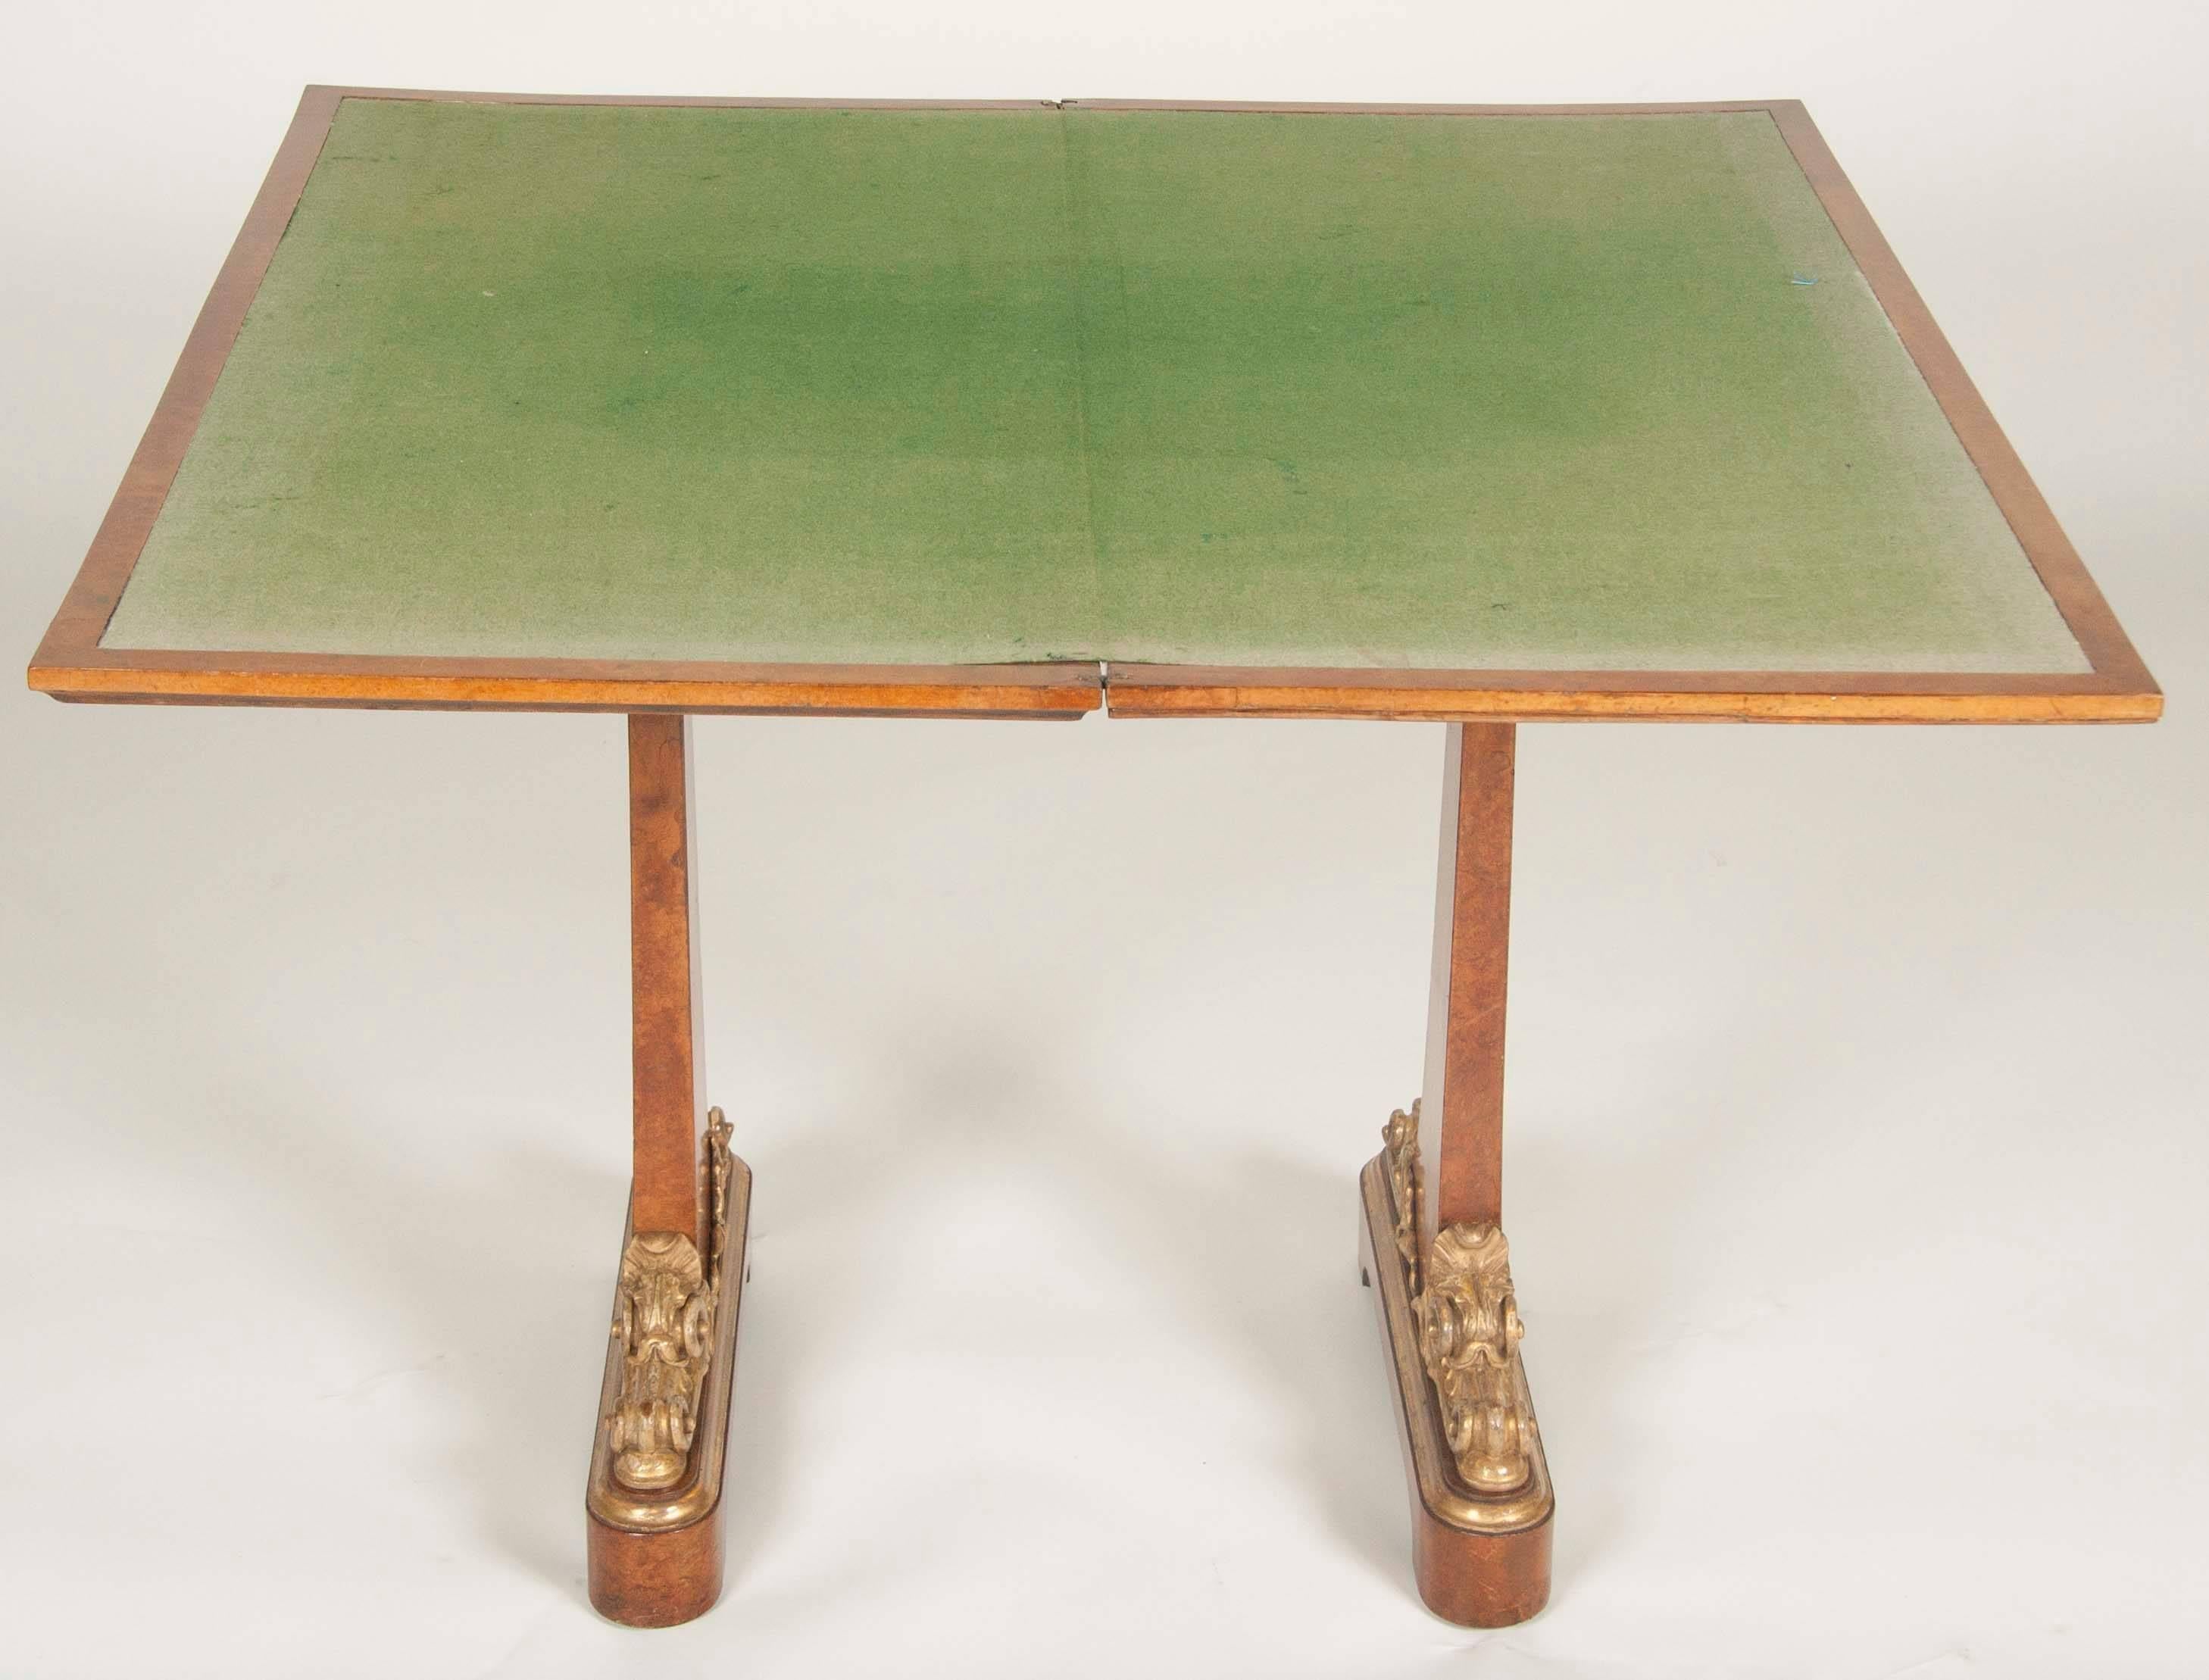 Late Regency Games Table by T.G Seddon In Good Condition For Sale In Stamford, CT